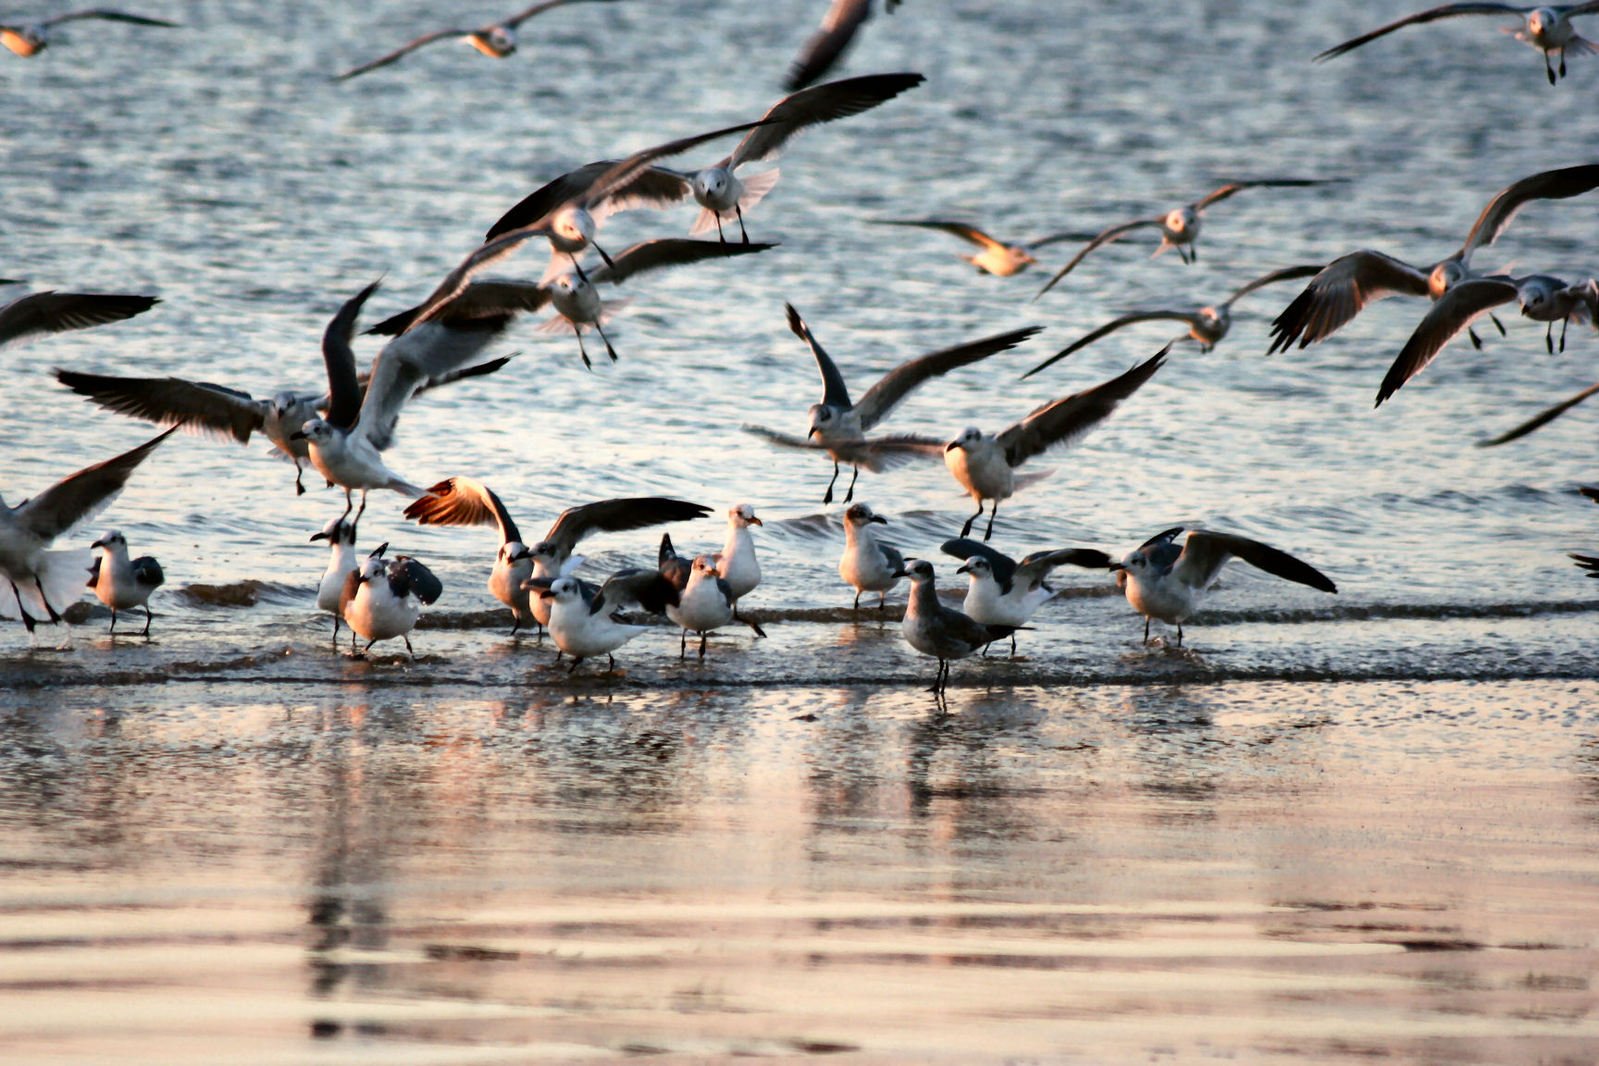 sea gulls flying over a group of birds at the edge of a body of water